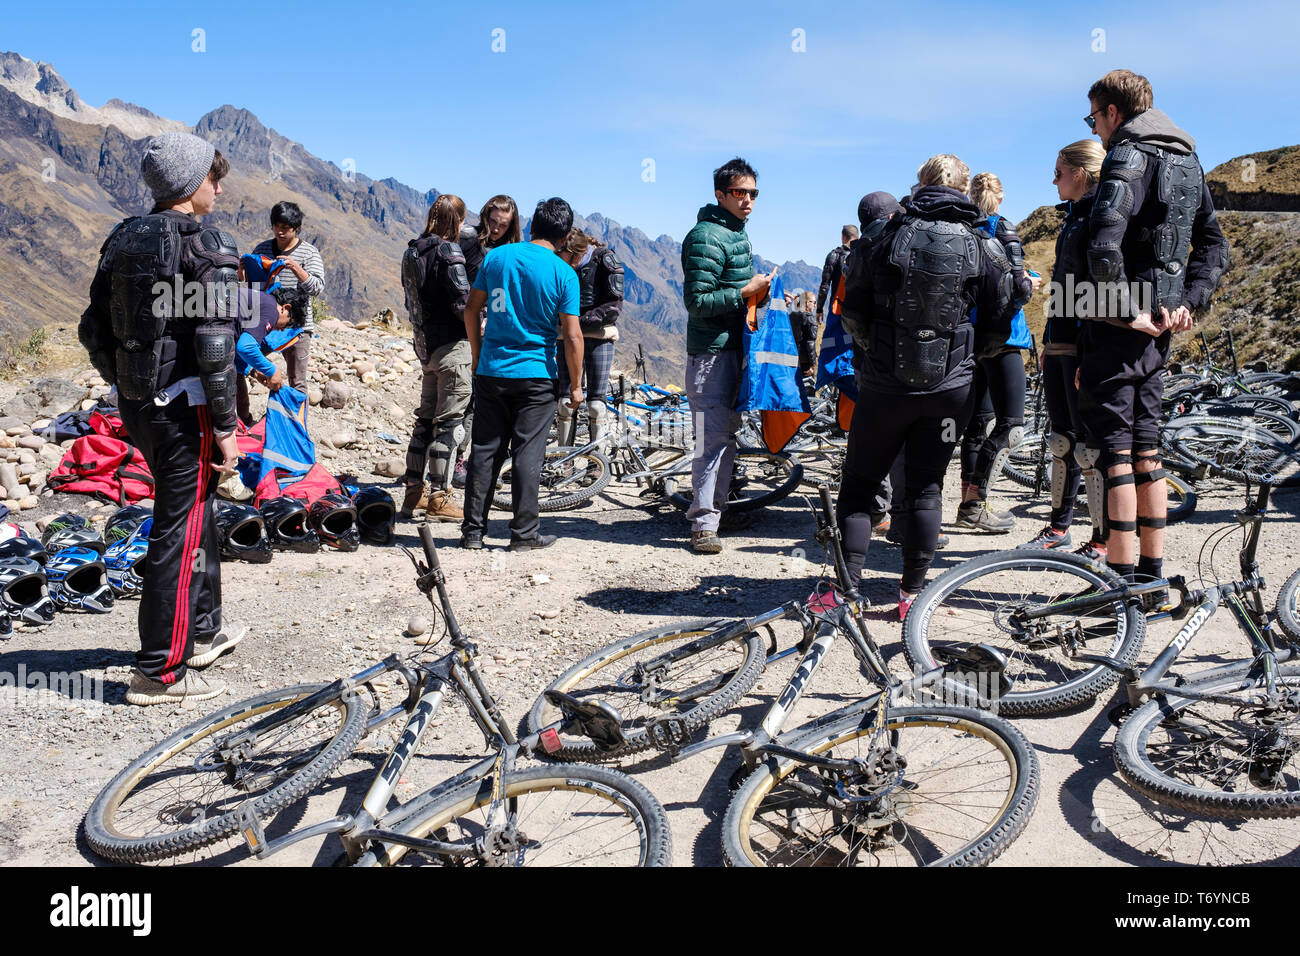 People getting ready for an exciting downhill ride on mountain bike in the Cusco Region of Peru Stock Photo